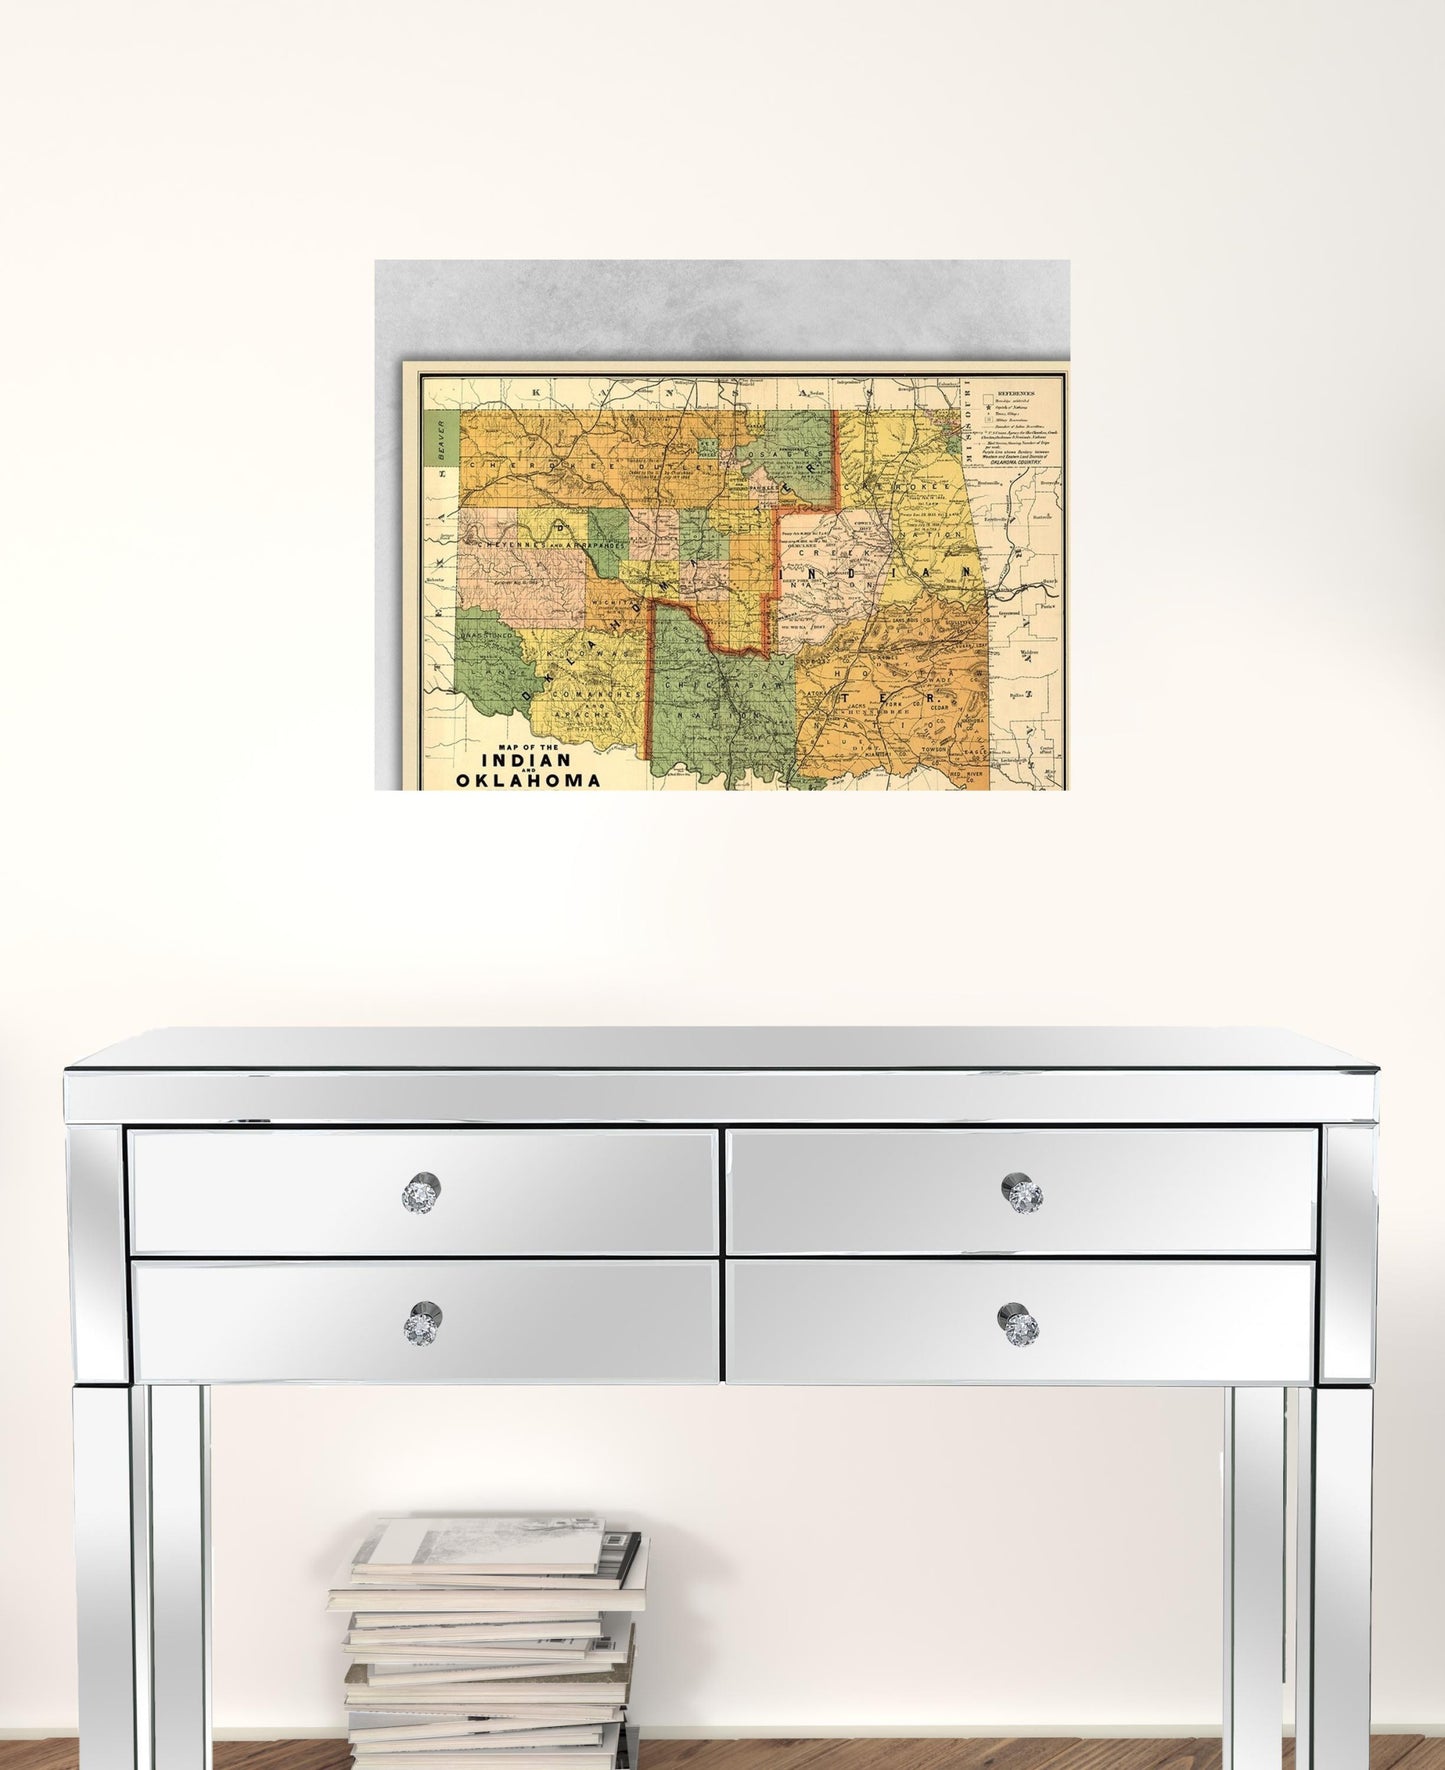 24" X 32" Map Of Indian And Oklahoma Territories Vintage Poster Wall Art